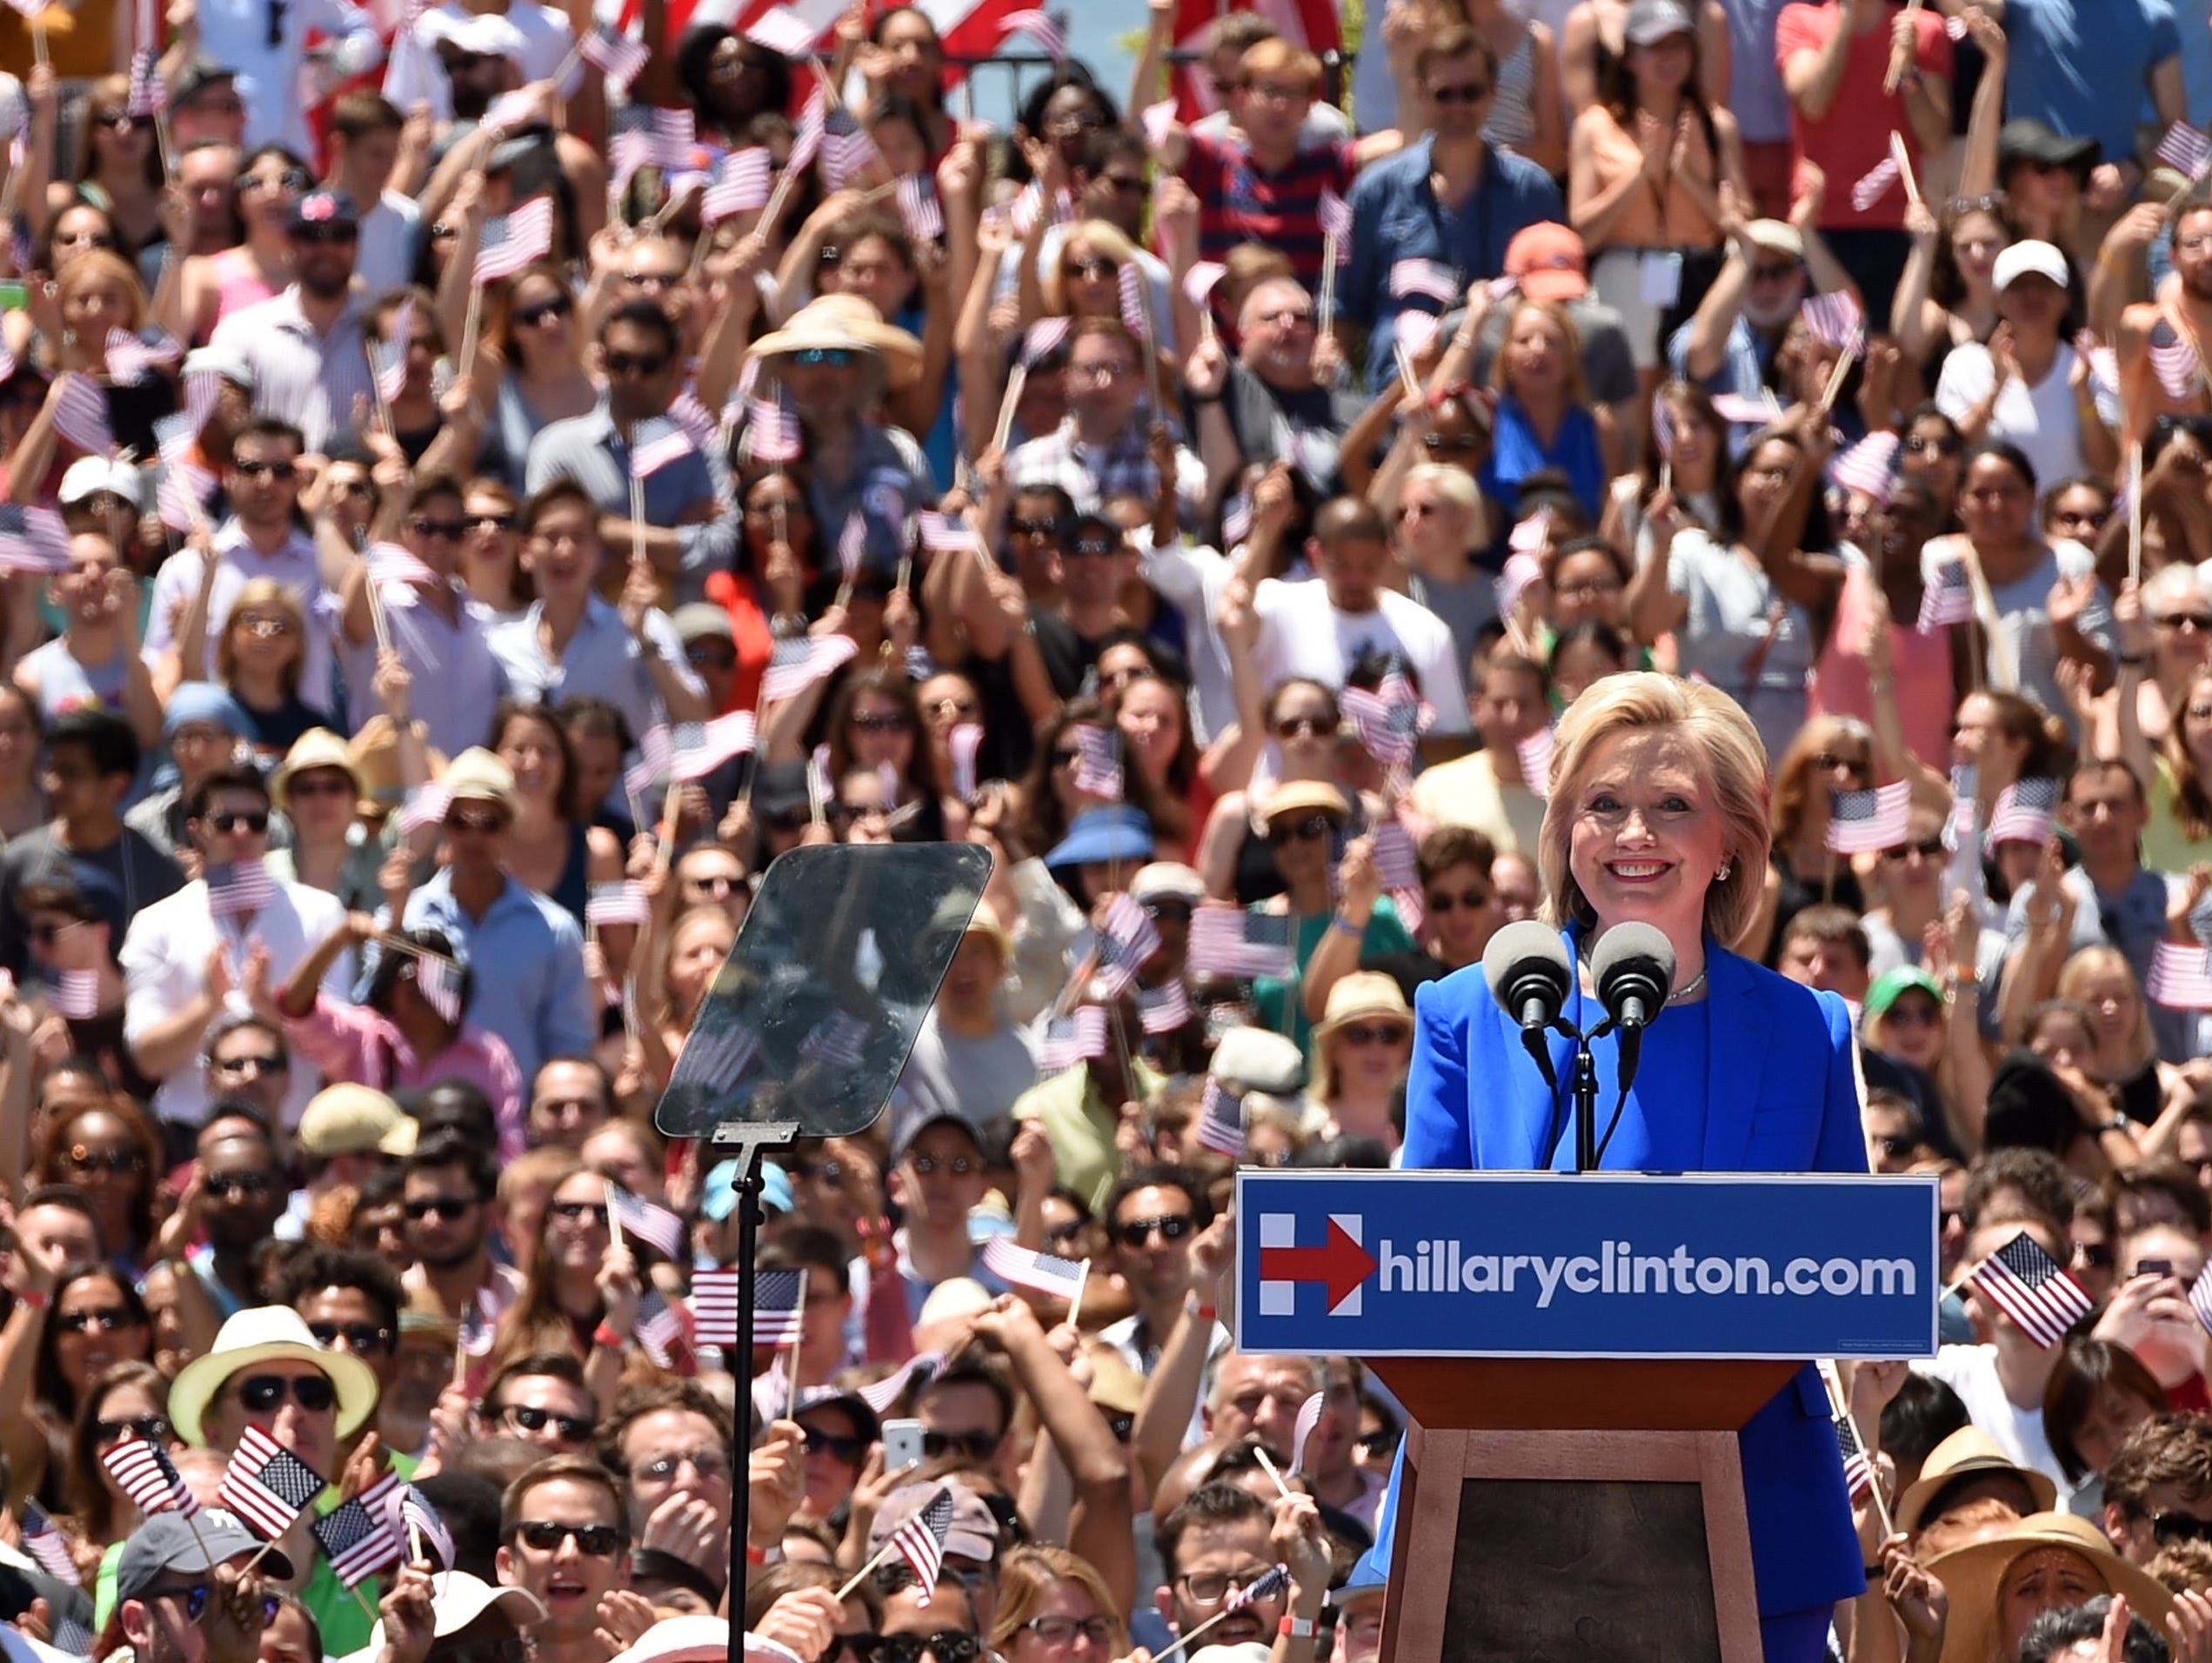 Hillary Clinton formally launches her campaign on Roosevelt Island on June 13, 2015.